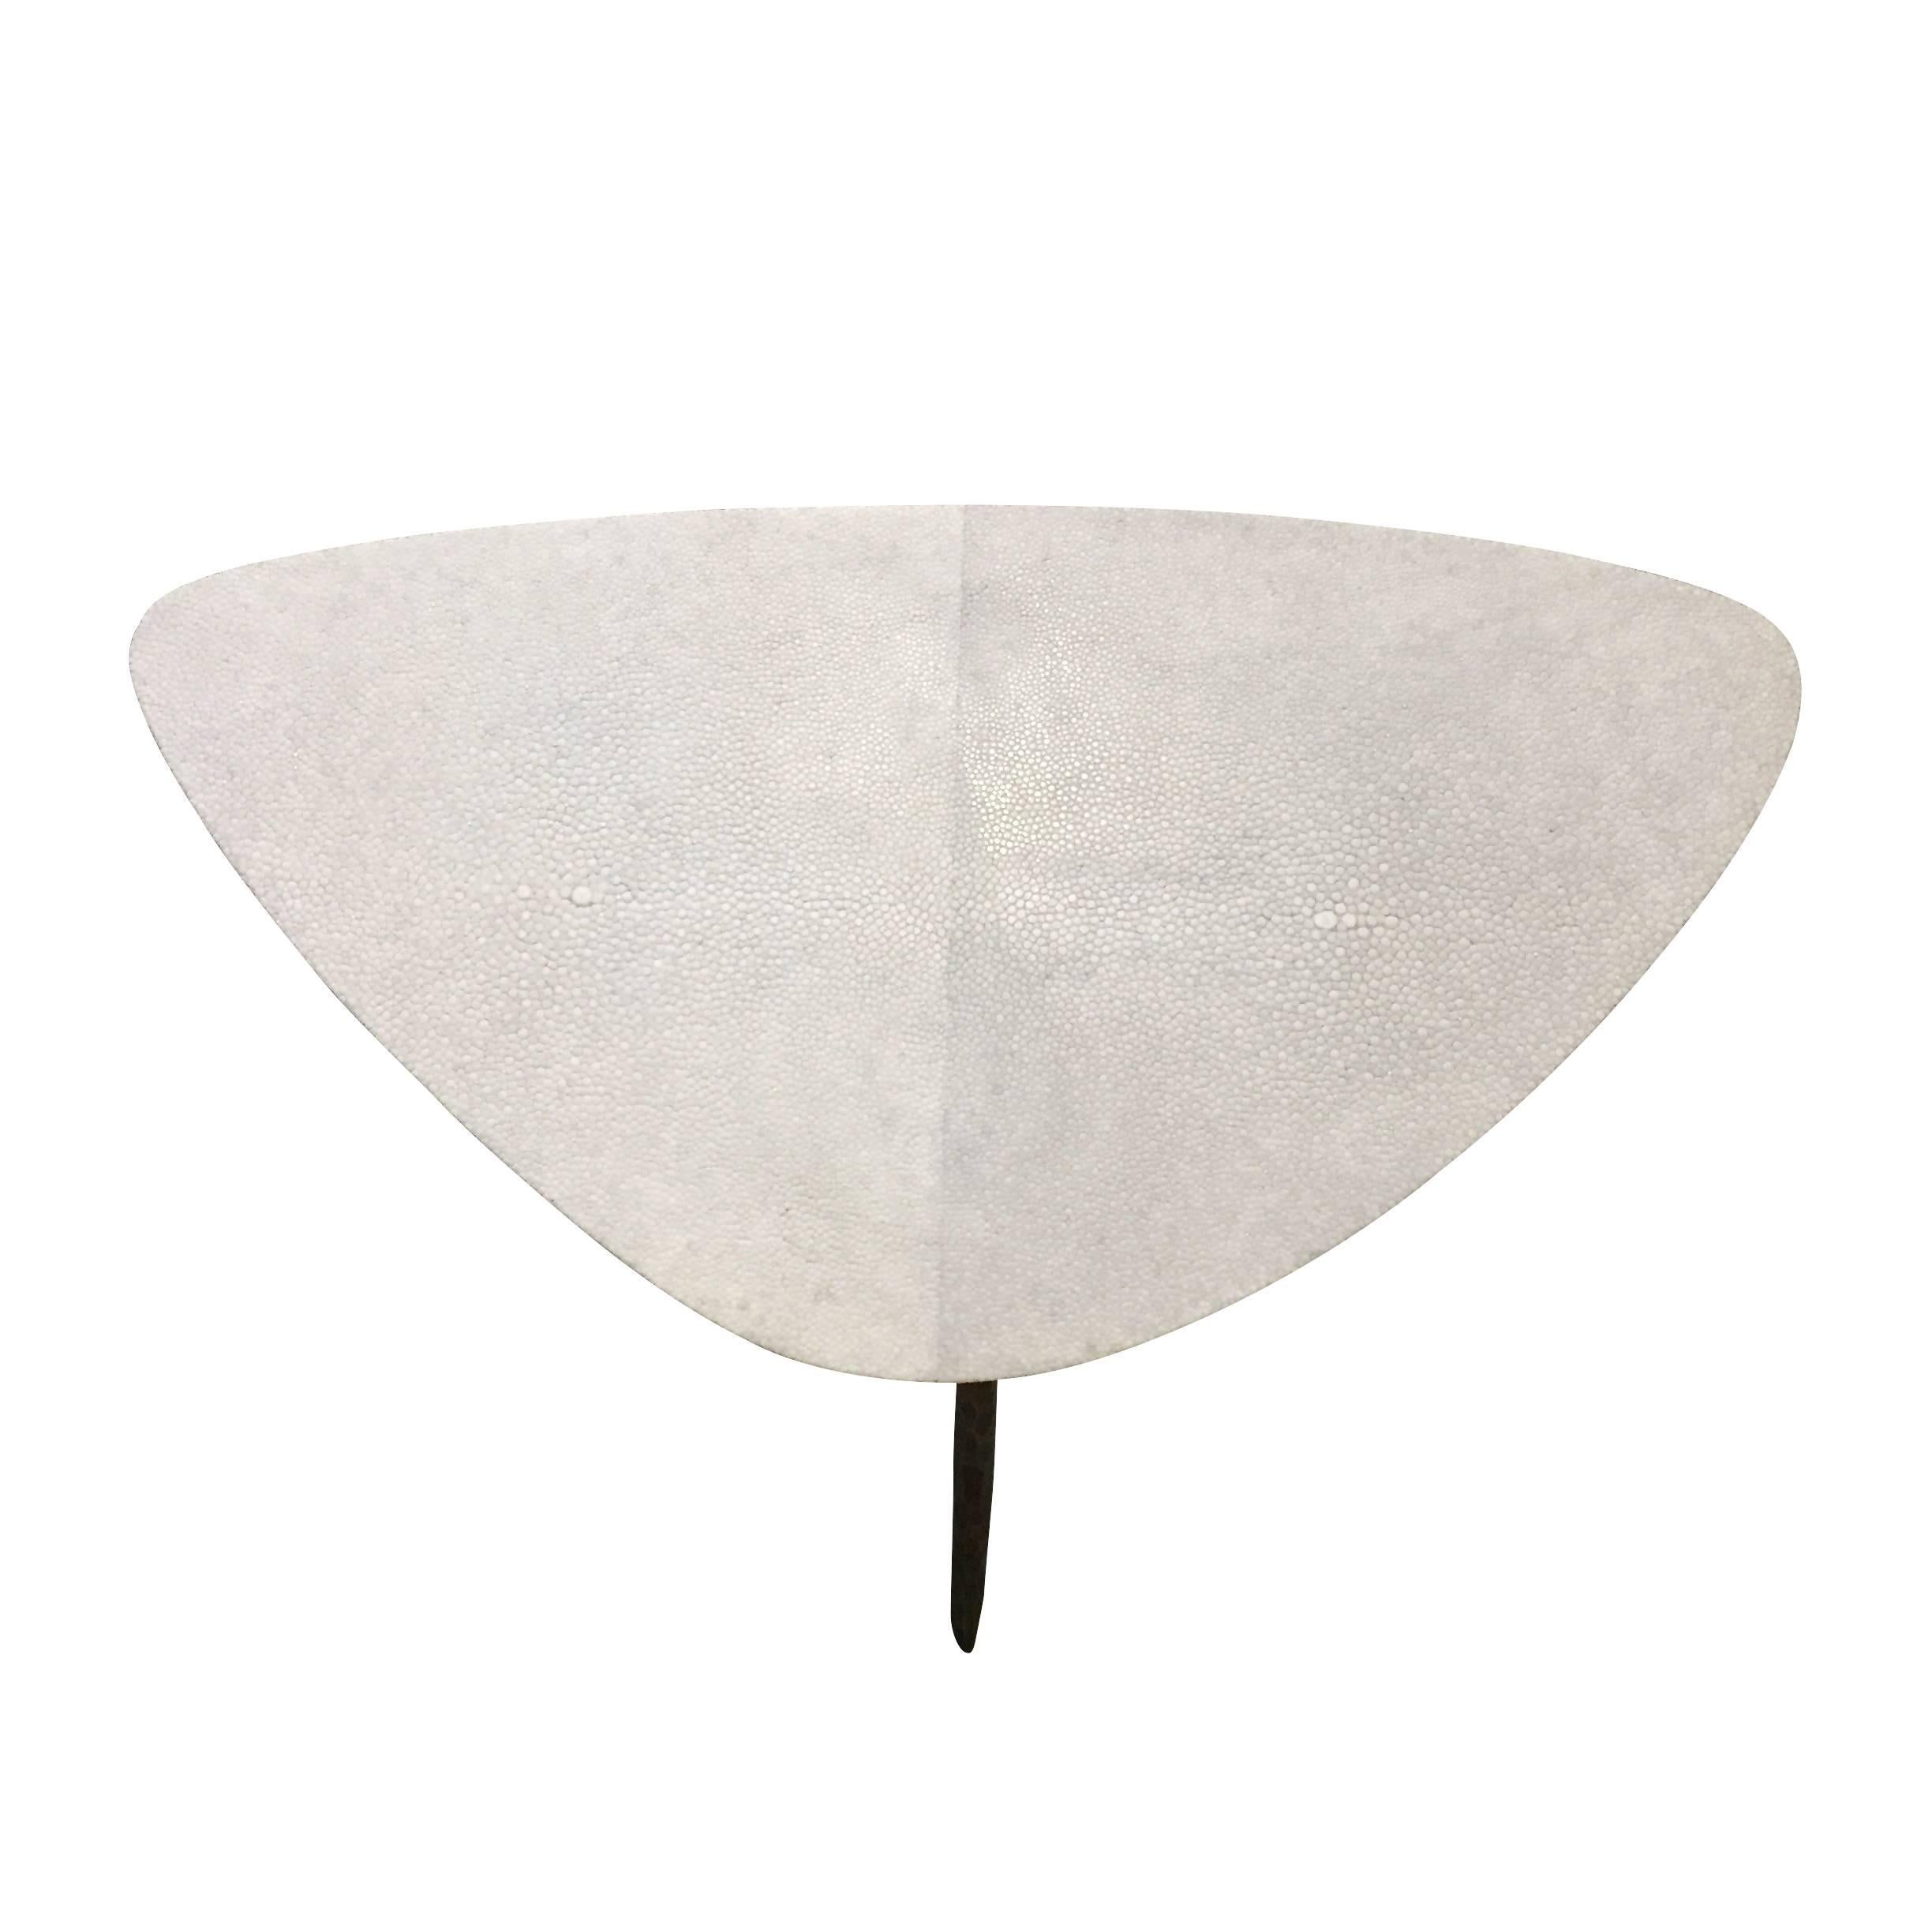 Contemporary French cream colored tear drop shape shagreen top cocktail table.
Sculptural hammered bronze base.
